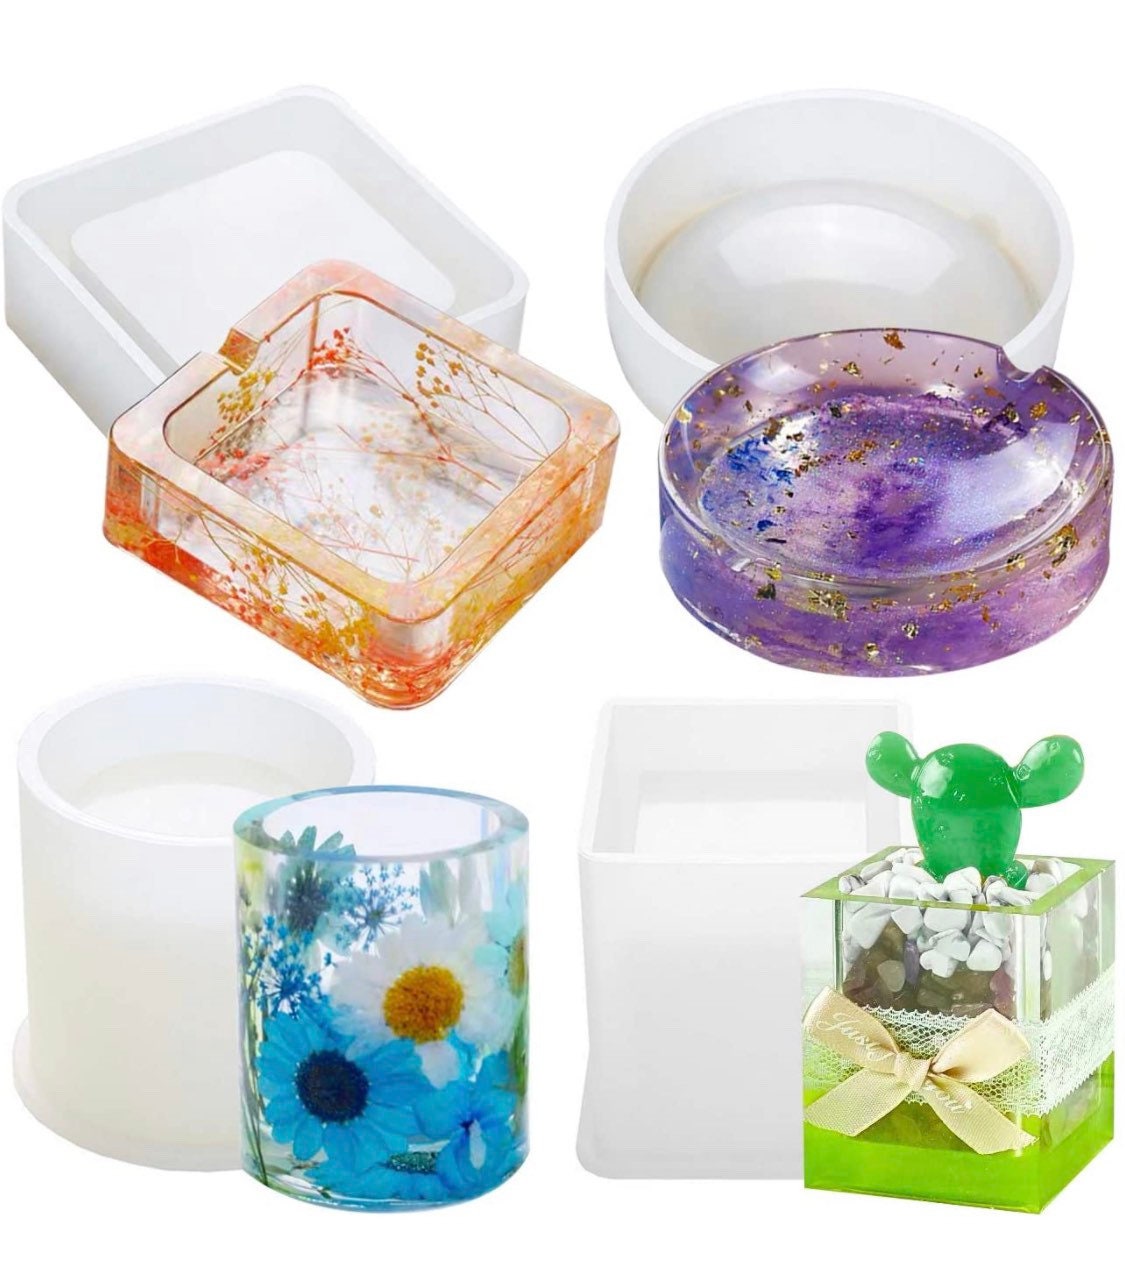 Large 4pc Resin Cup / Flower Pot / Trinket / Ash Tray silicone mold kit